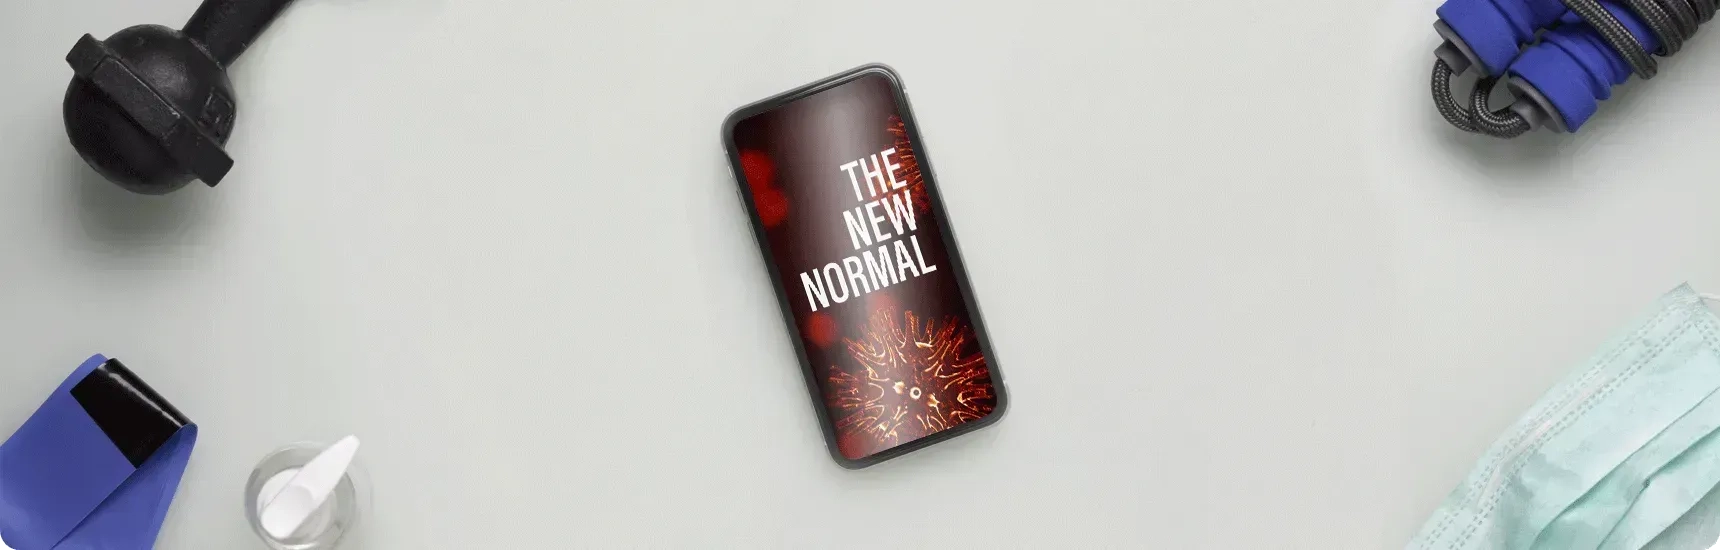 six_things_that_will_be_the_new_normal